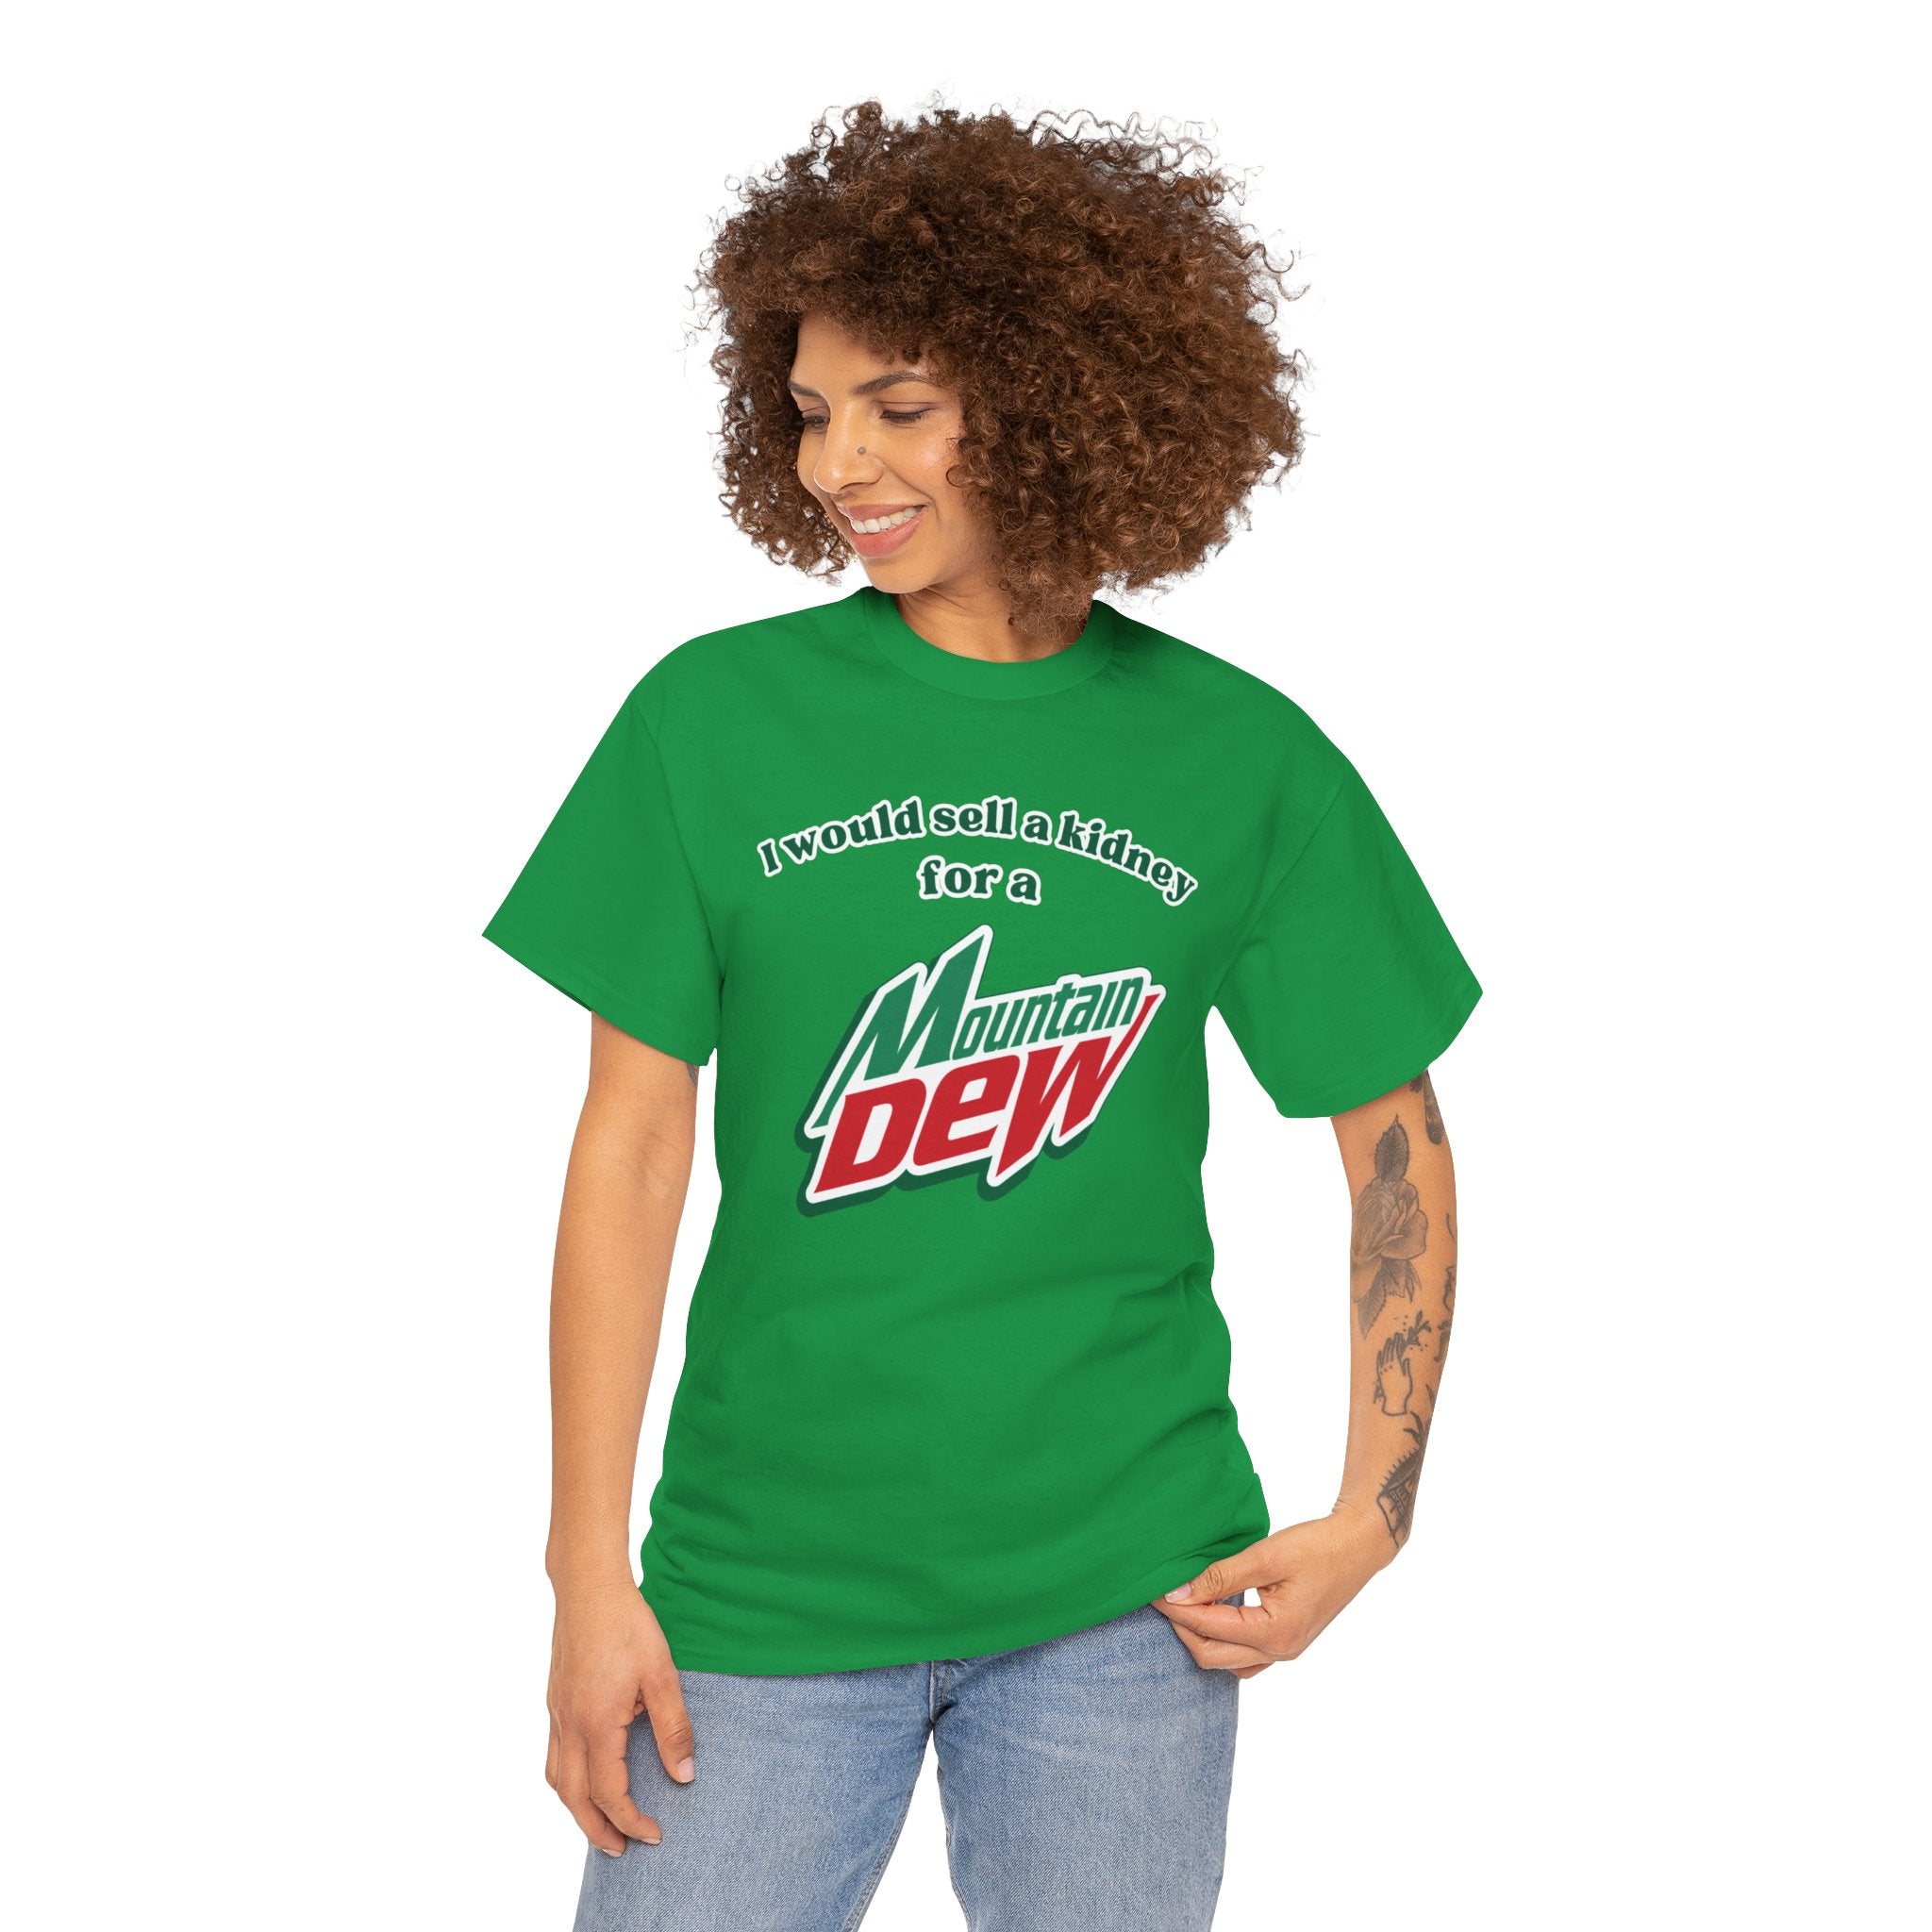 I Would Sell a Kidney for a Mountain Dew